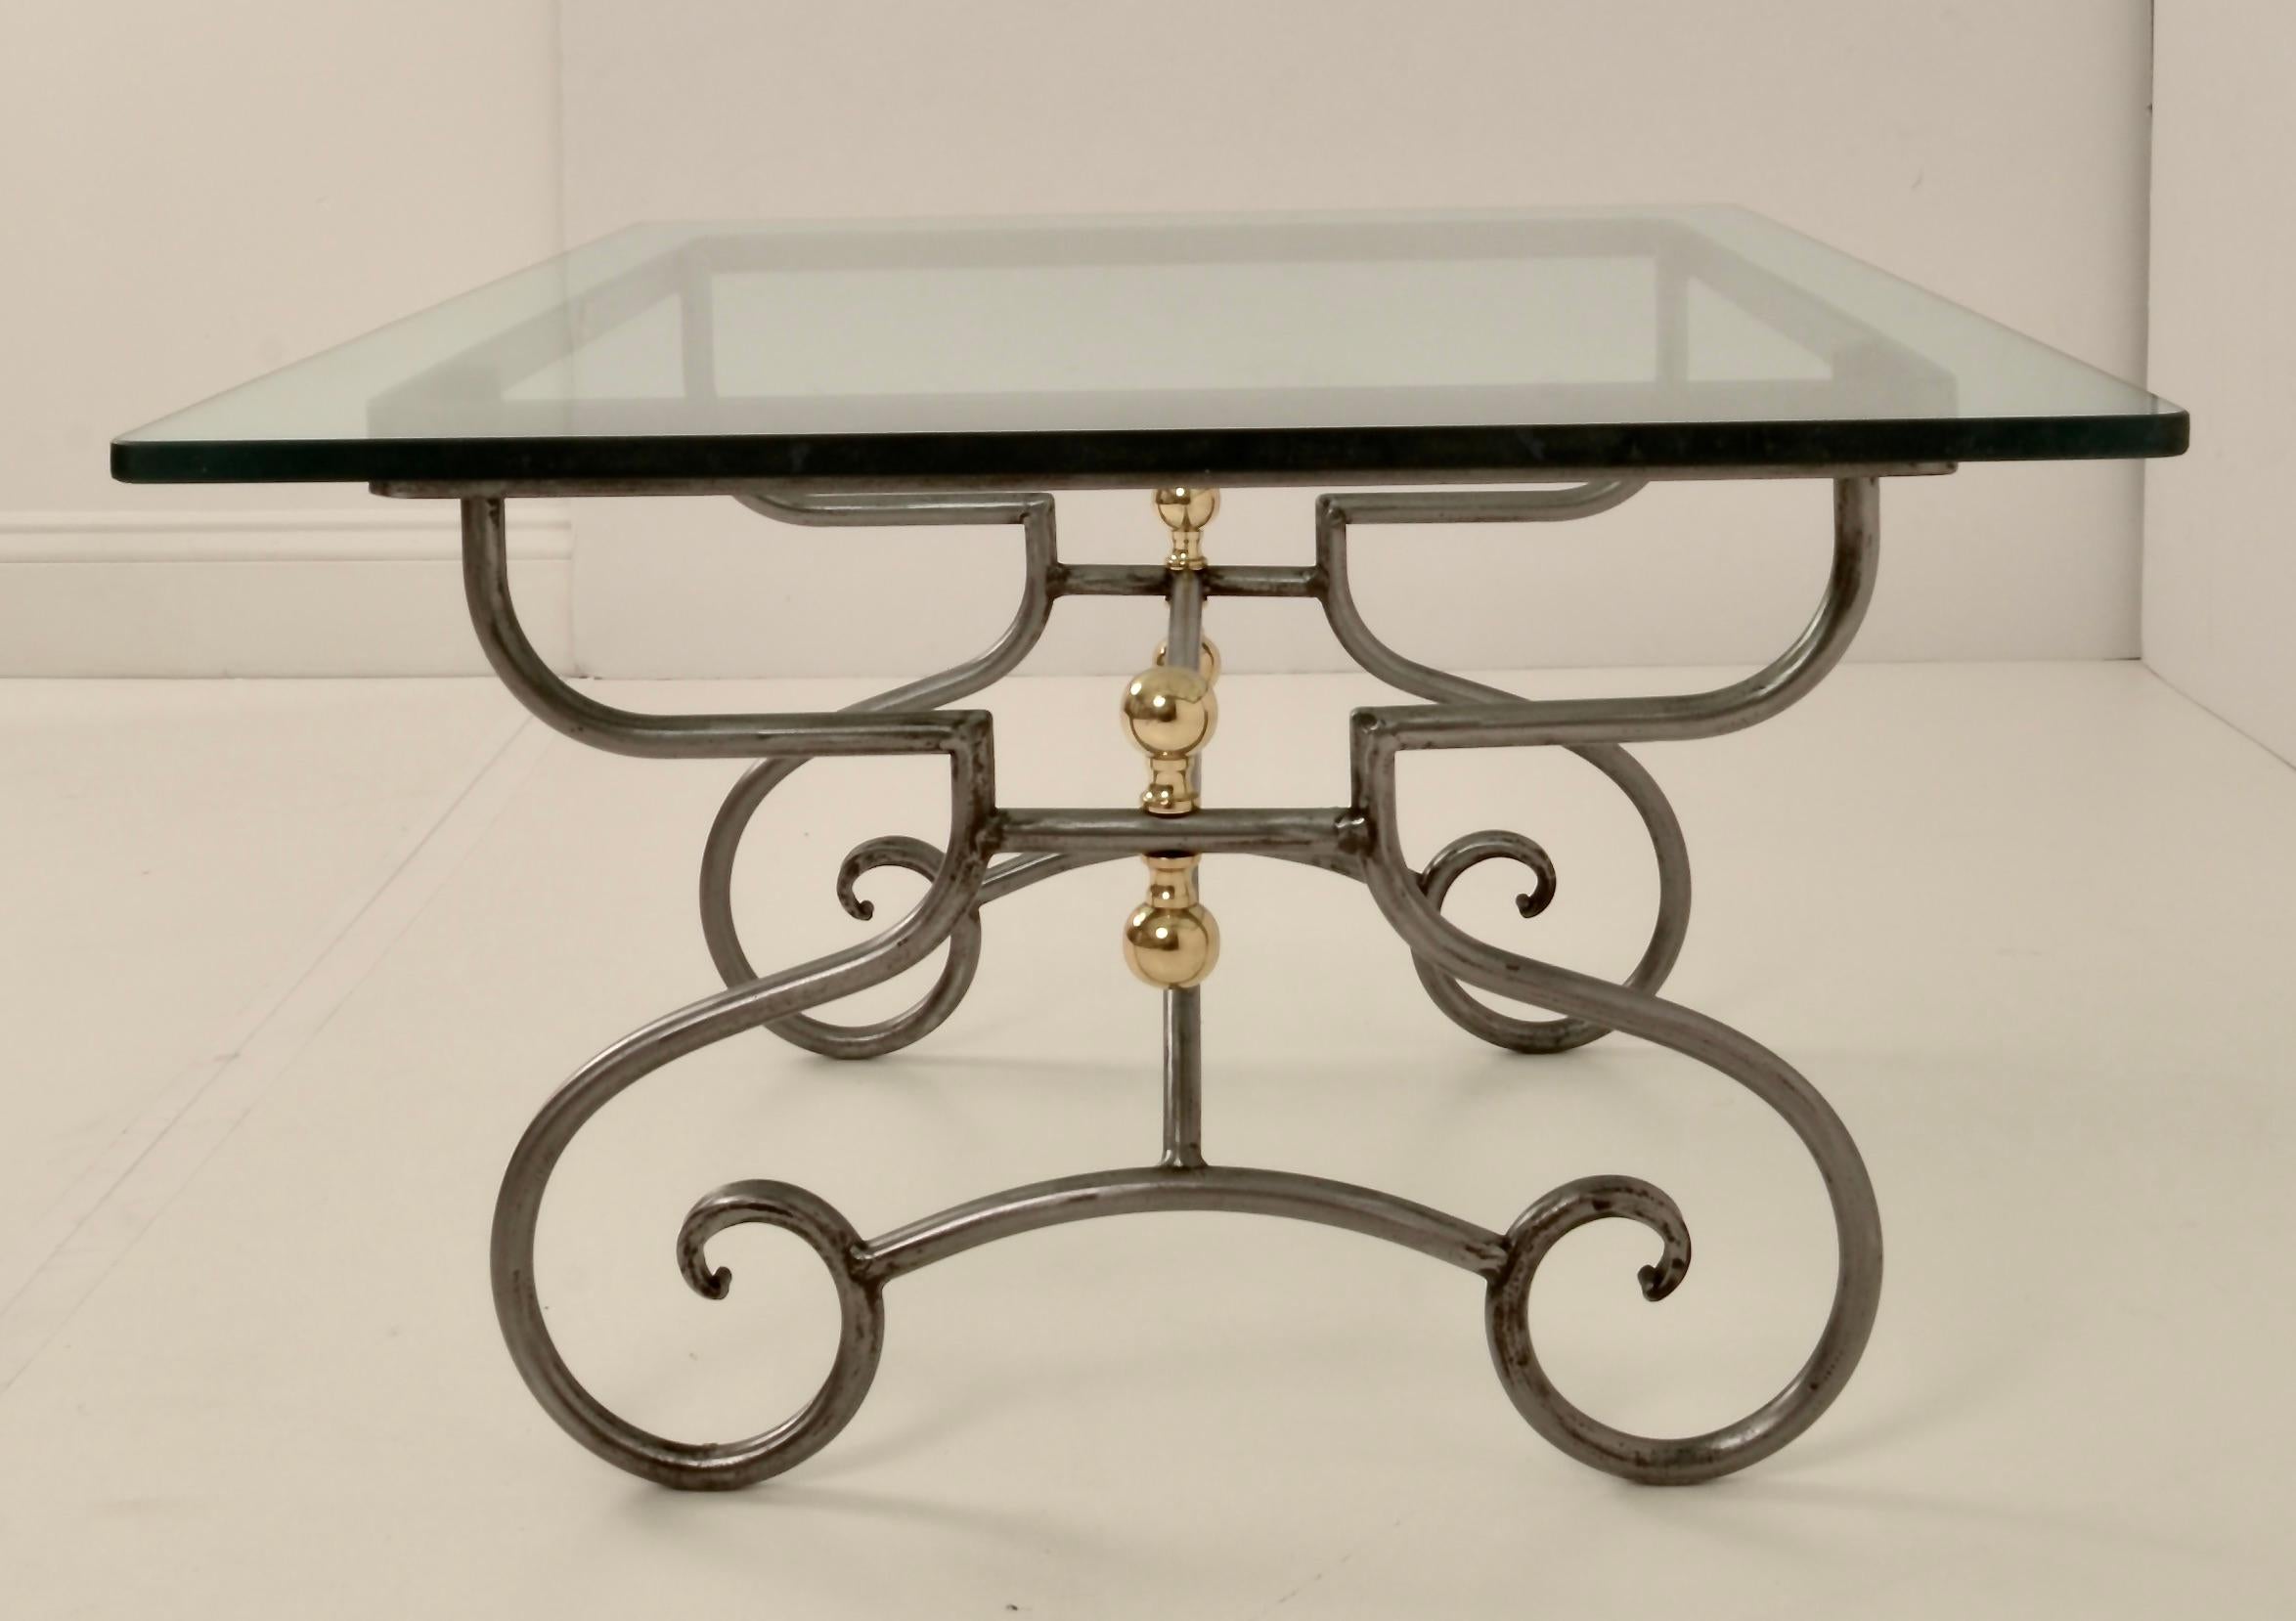 French Provincial French Steel and Brass Cocktail Table For Sale